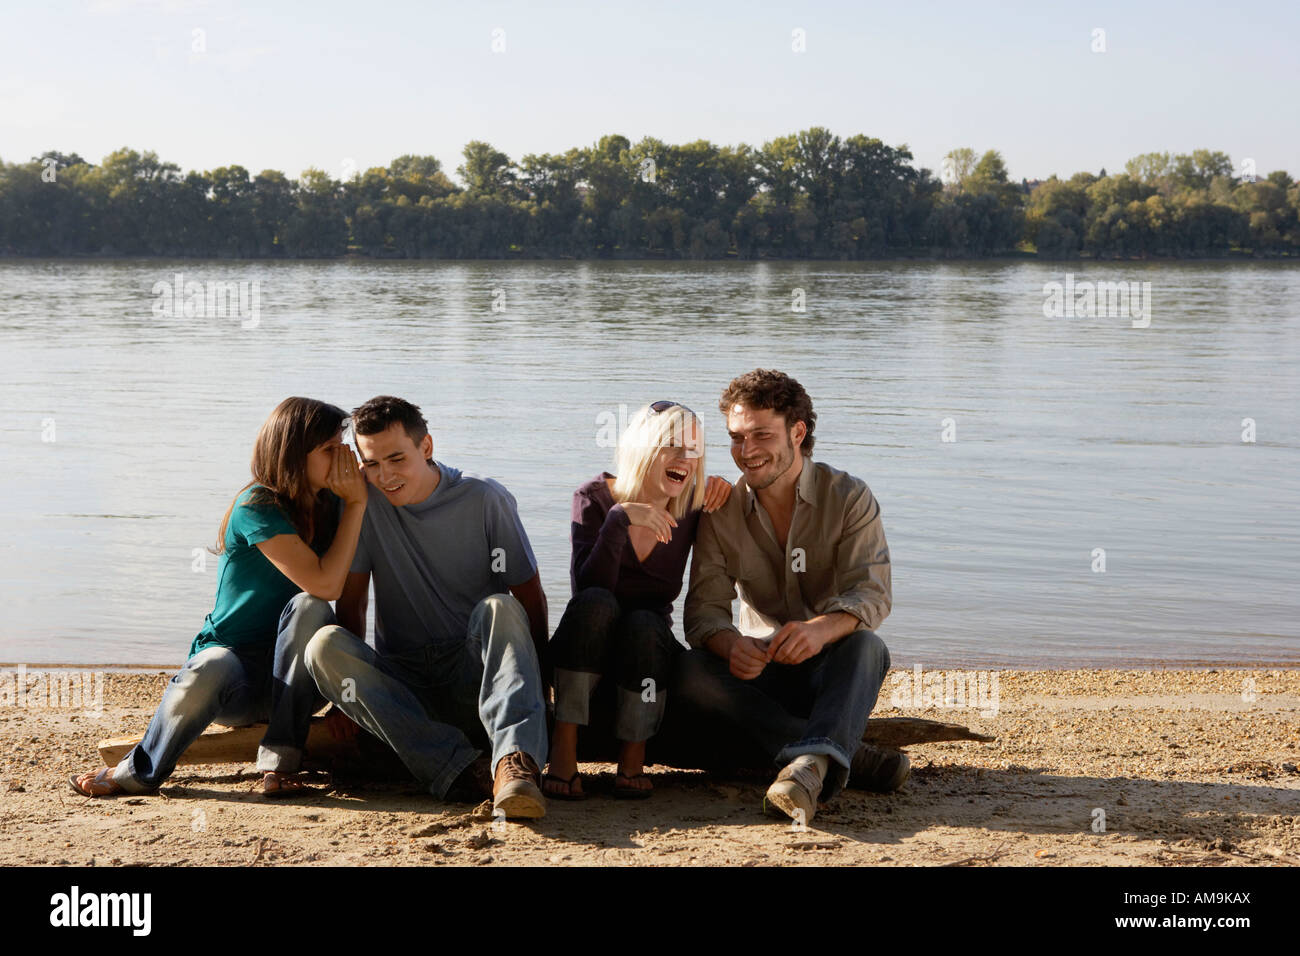 Four friends sitting on log by a lake smiling. Stock Photo